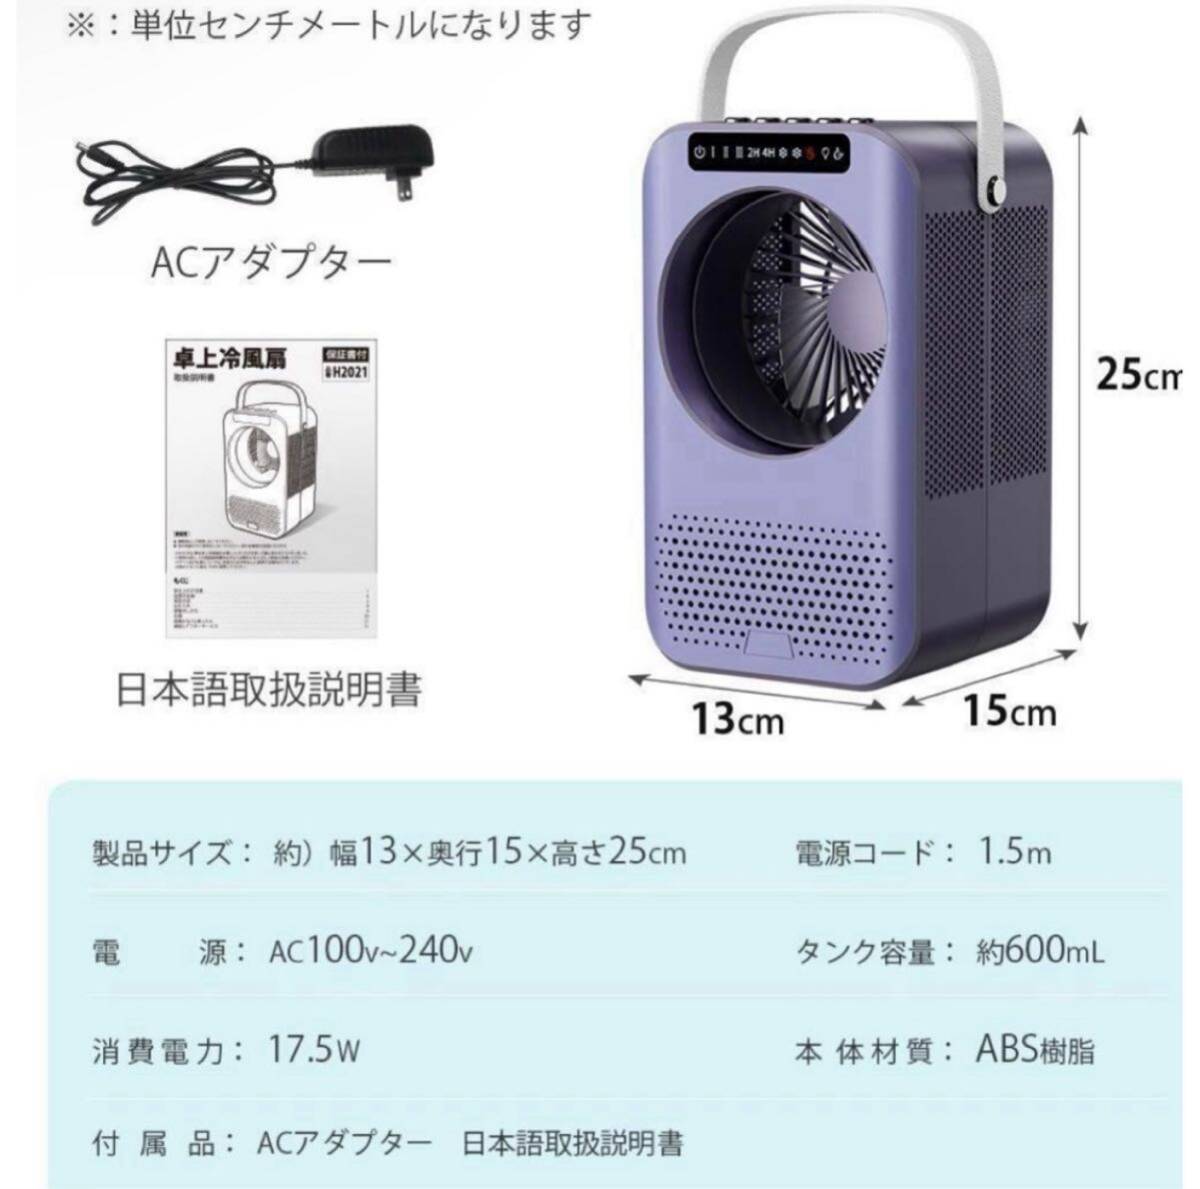  cold air fan small size cold manner machine 7 color light cold manner function desk electric fan cooling air flow 3 -step humidification Mist Mini timer high capacity 600ml continuation driving 6 hour LED Touch operation 